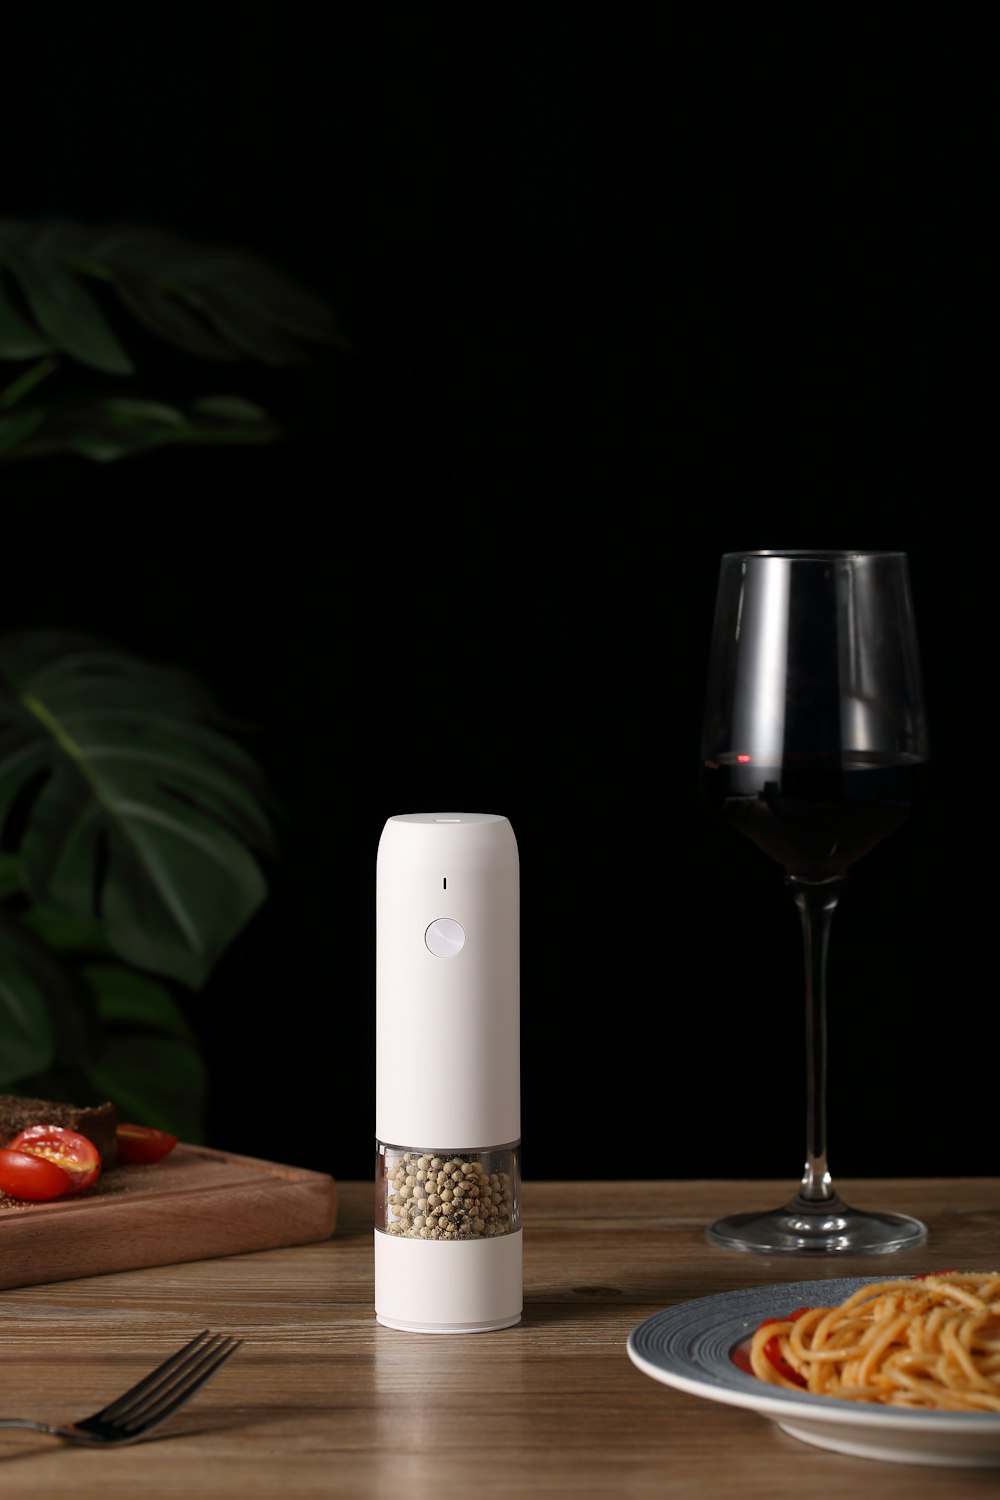 a glass of wine next to a white rectangular object on a wooden surface